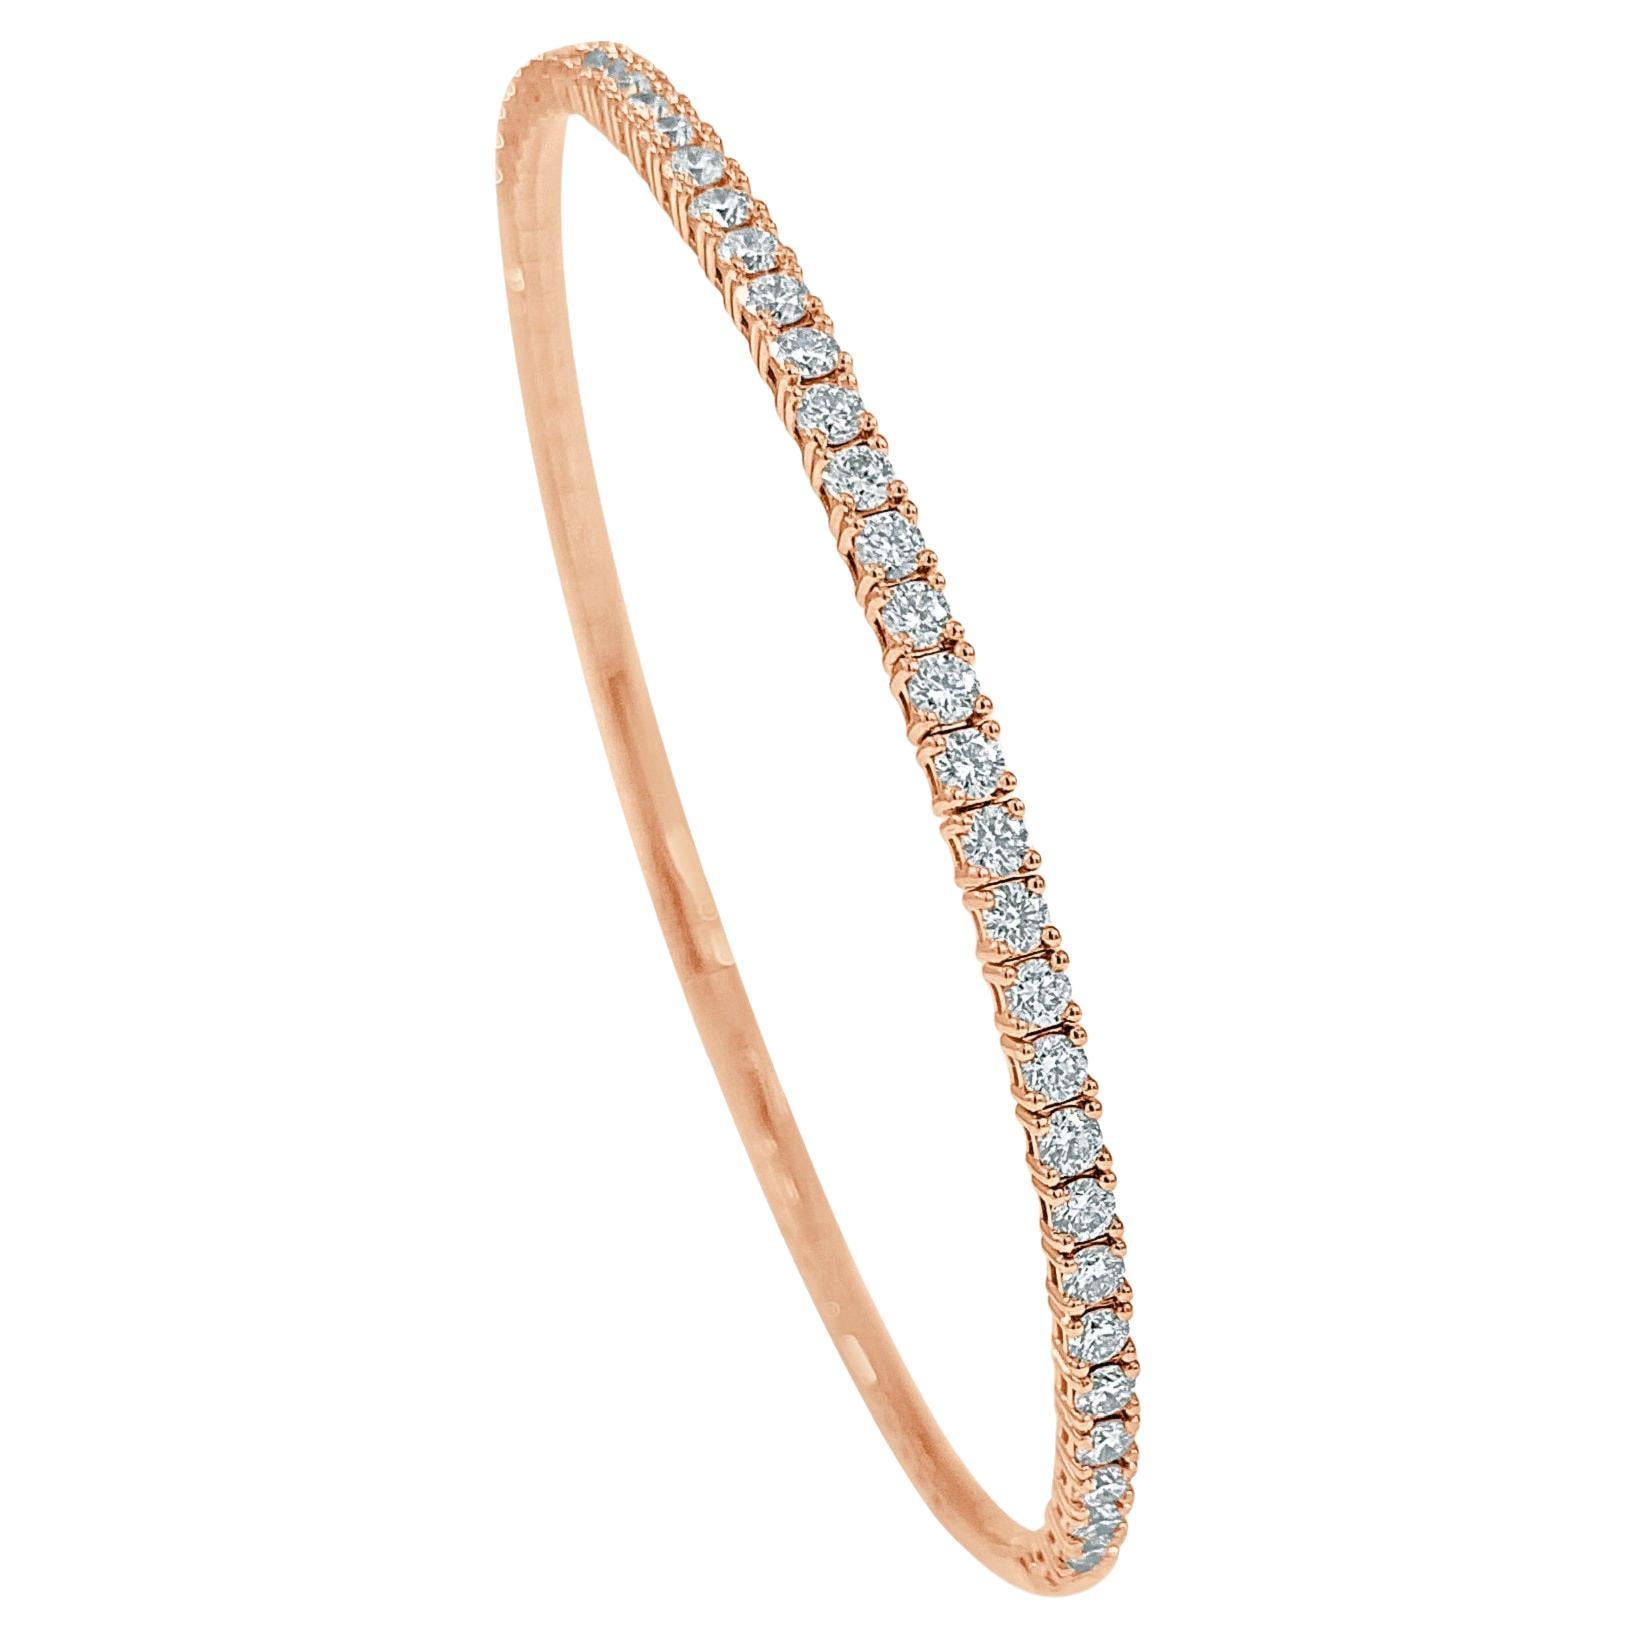 Diamond Bangle for Her 14k Gold 1.45 Ct Flexible Women's Stackable Bangle